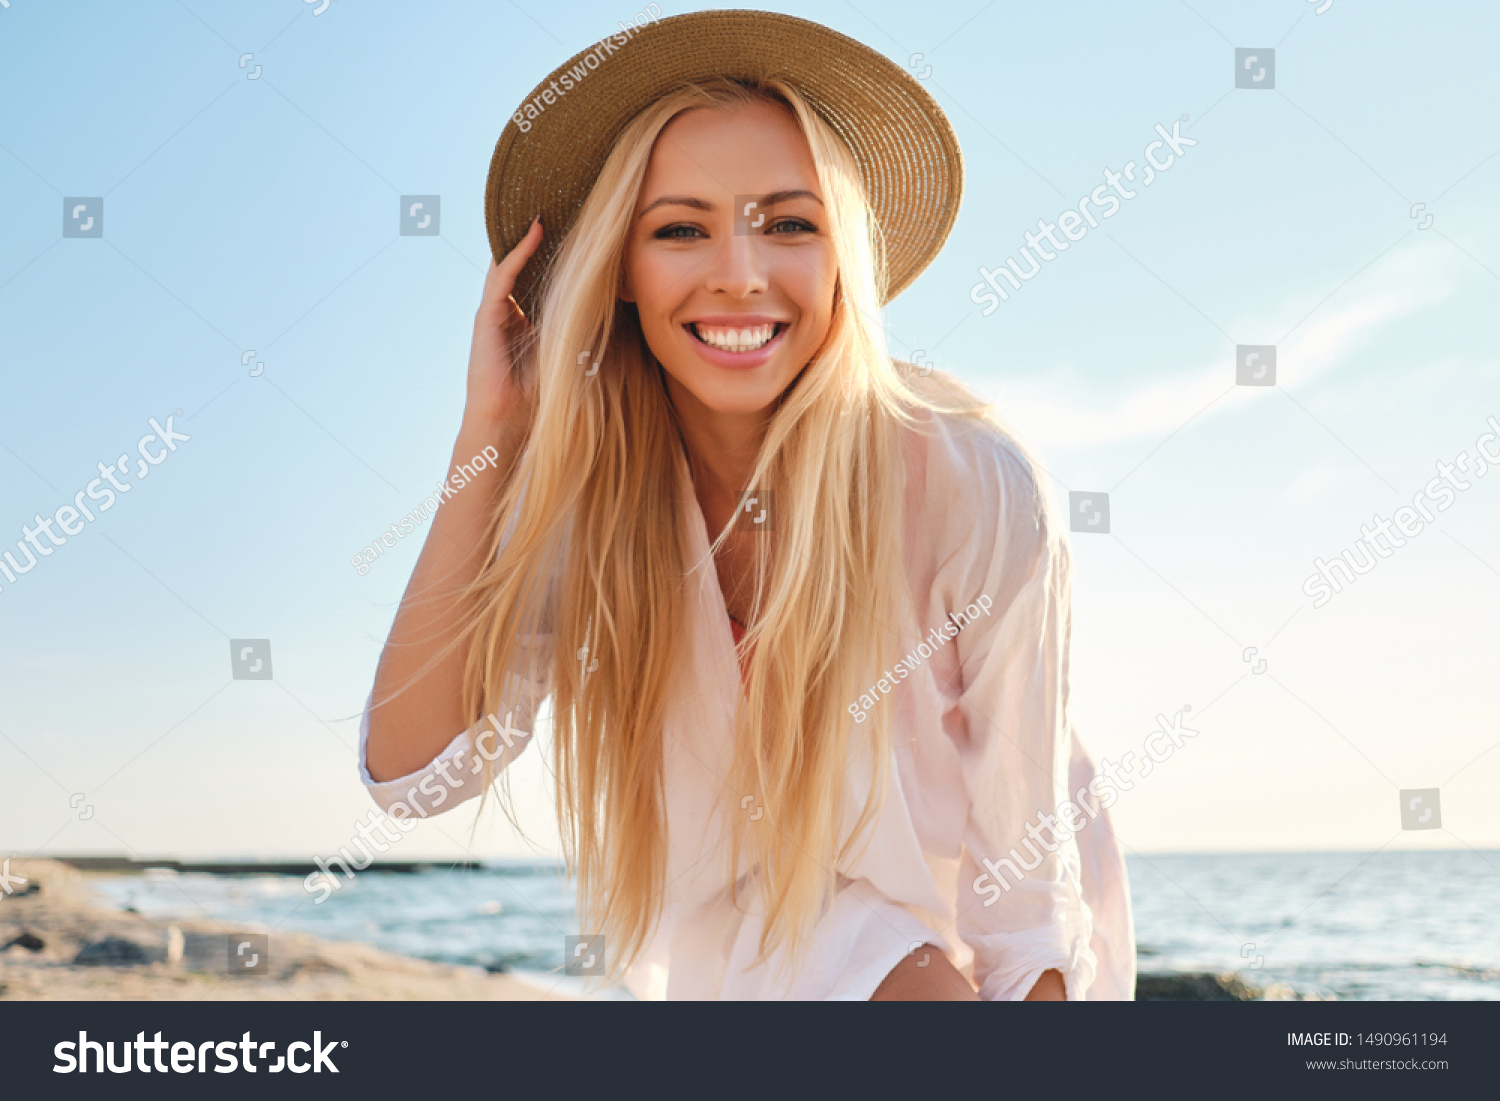 Young attractive smiling blond woman in white shirt and hat joyfully looking in camera with sea on background #1490961194